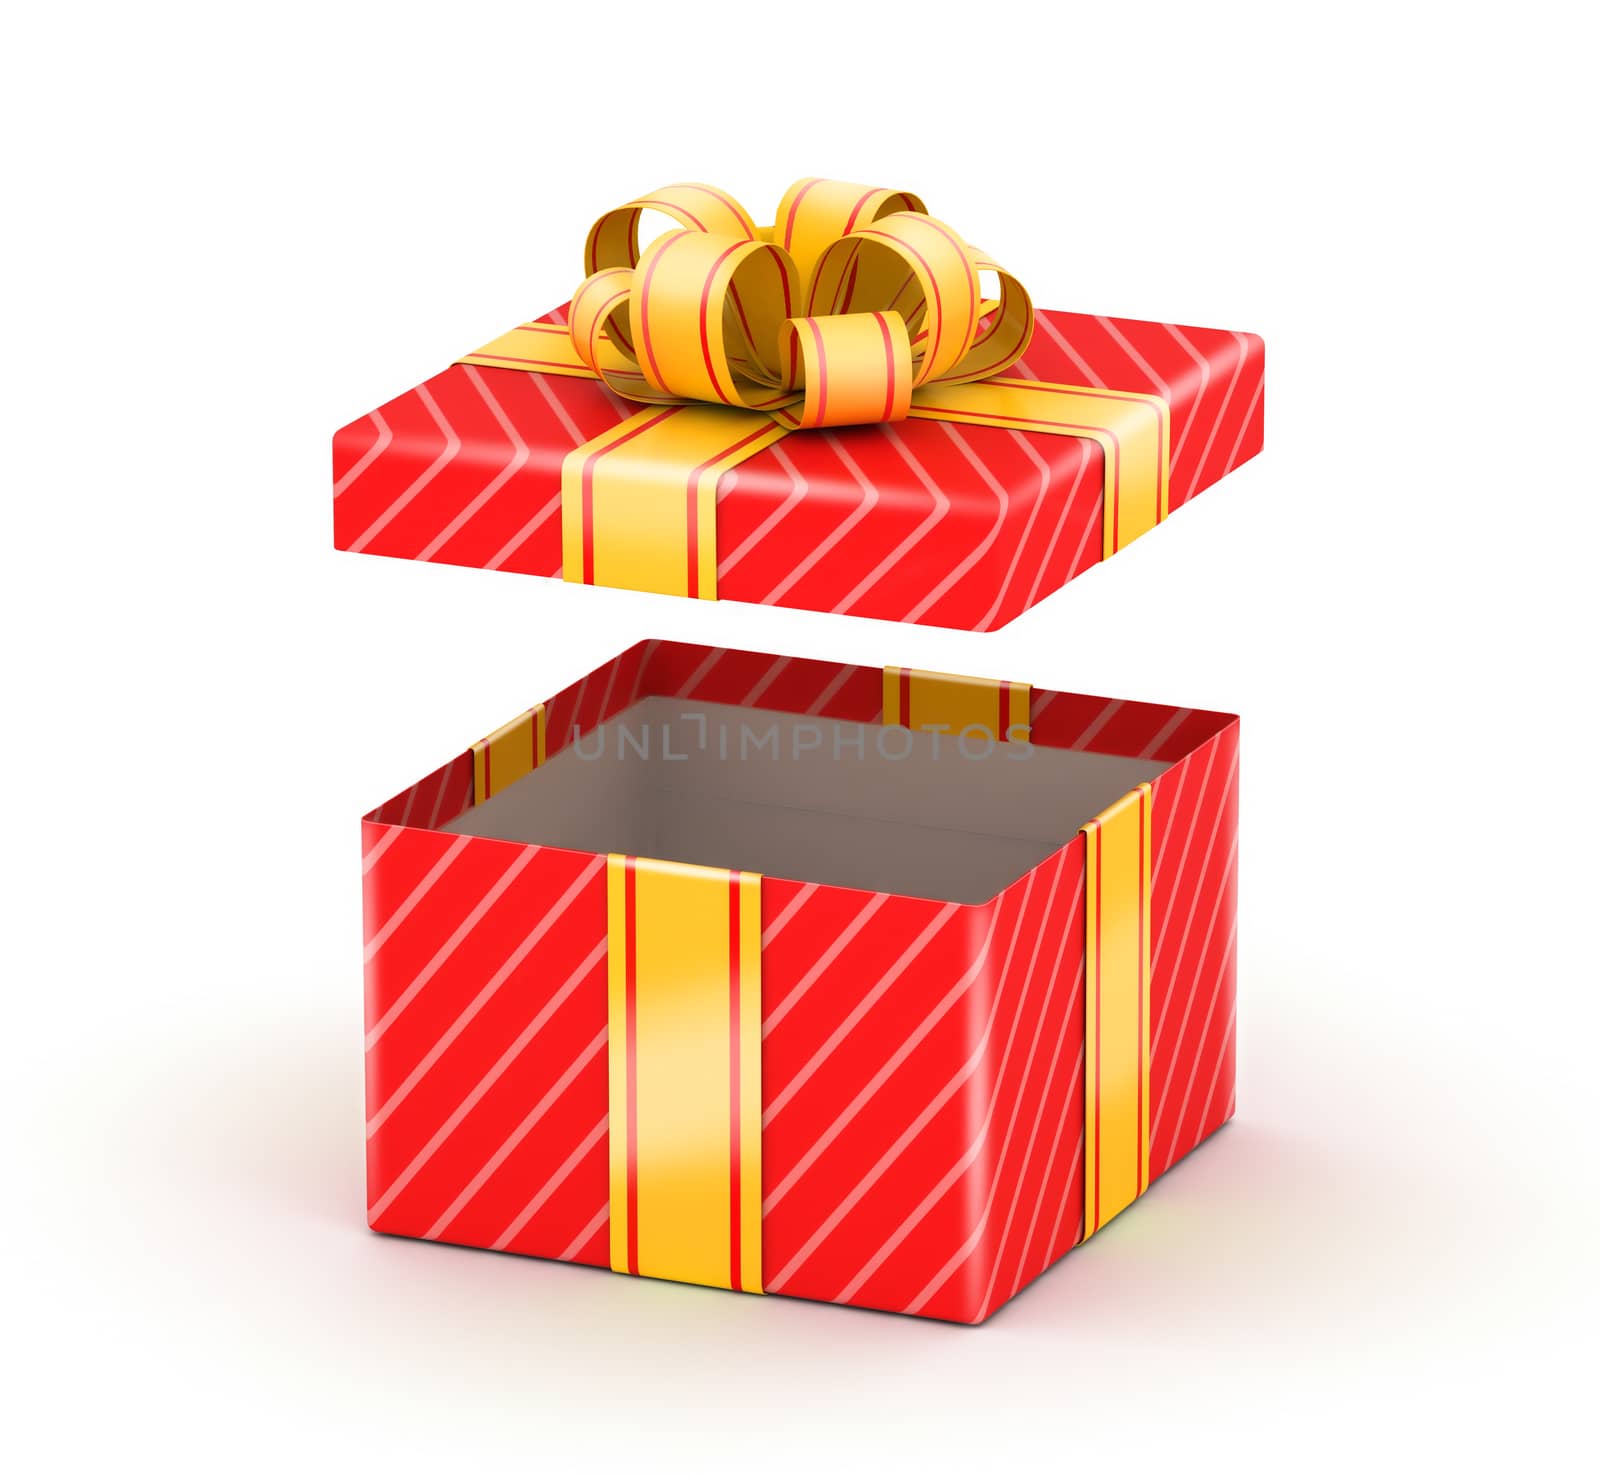 Opened red gift box with gold ribbons on white background